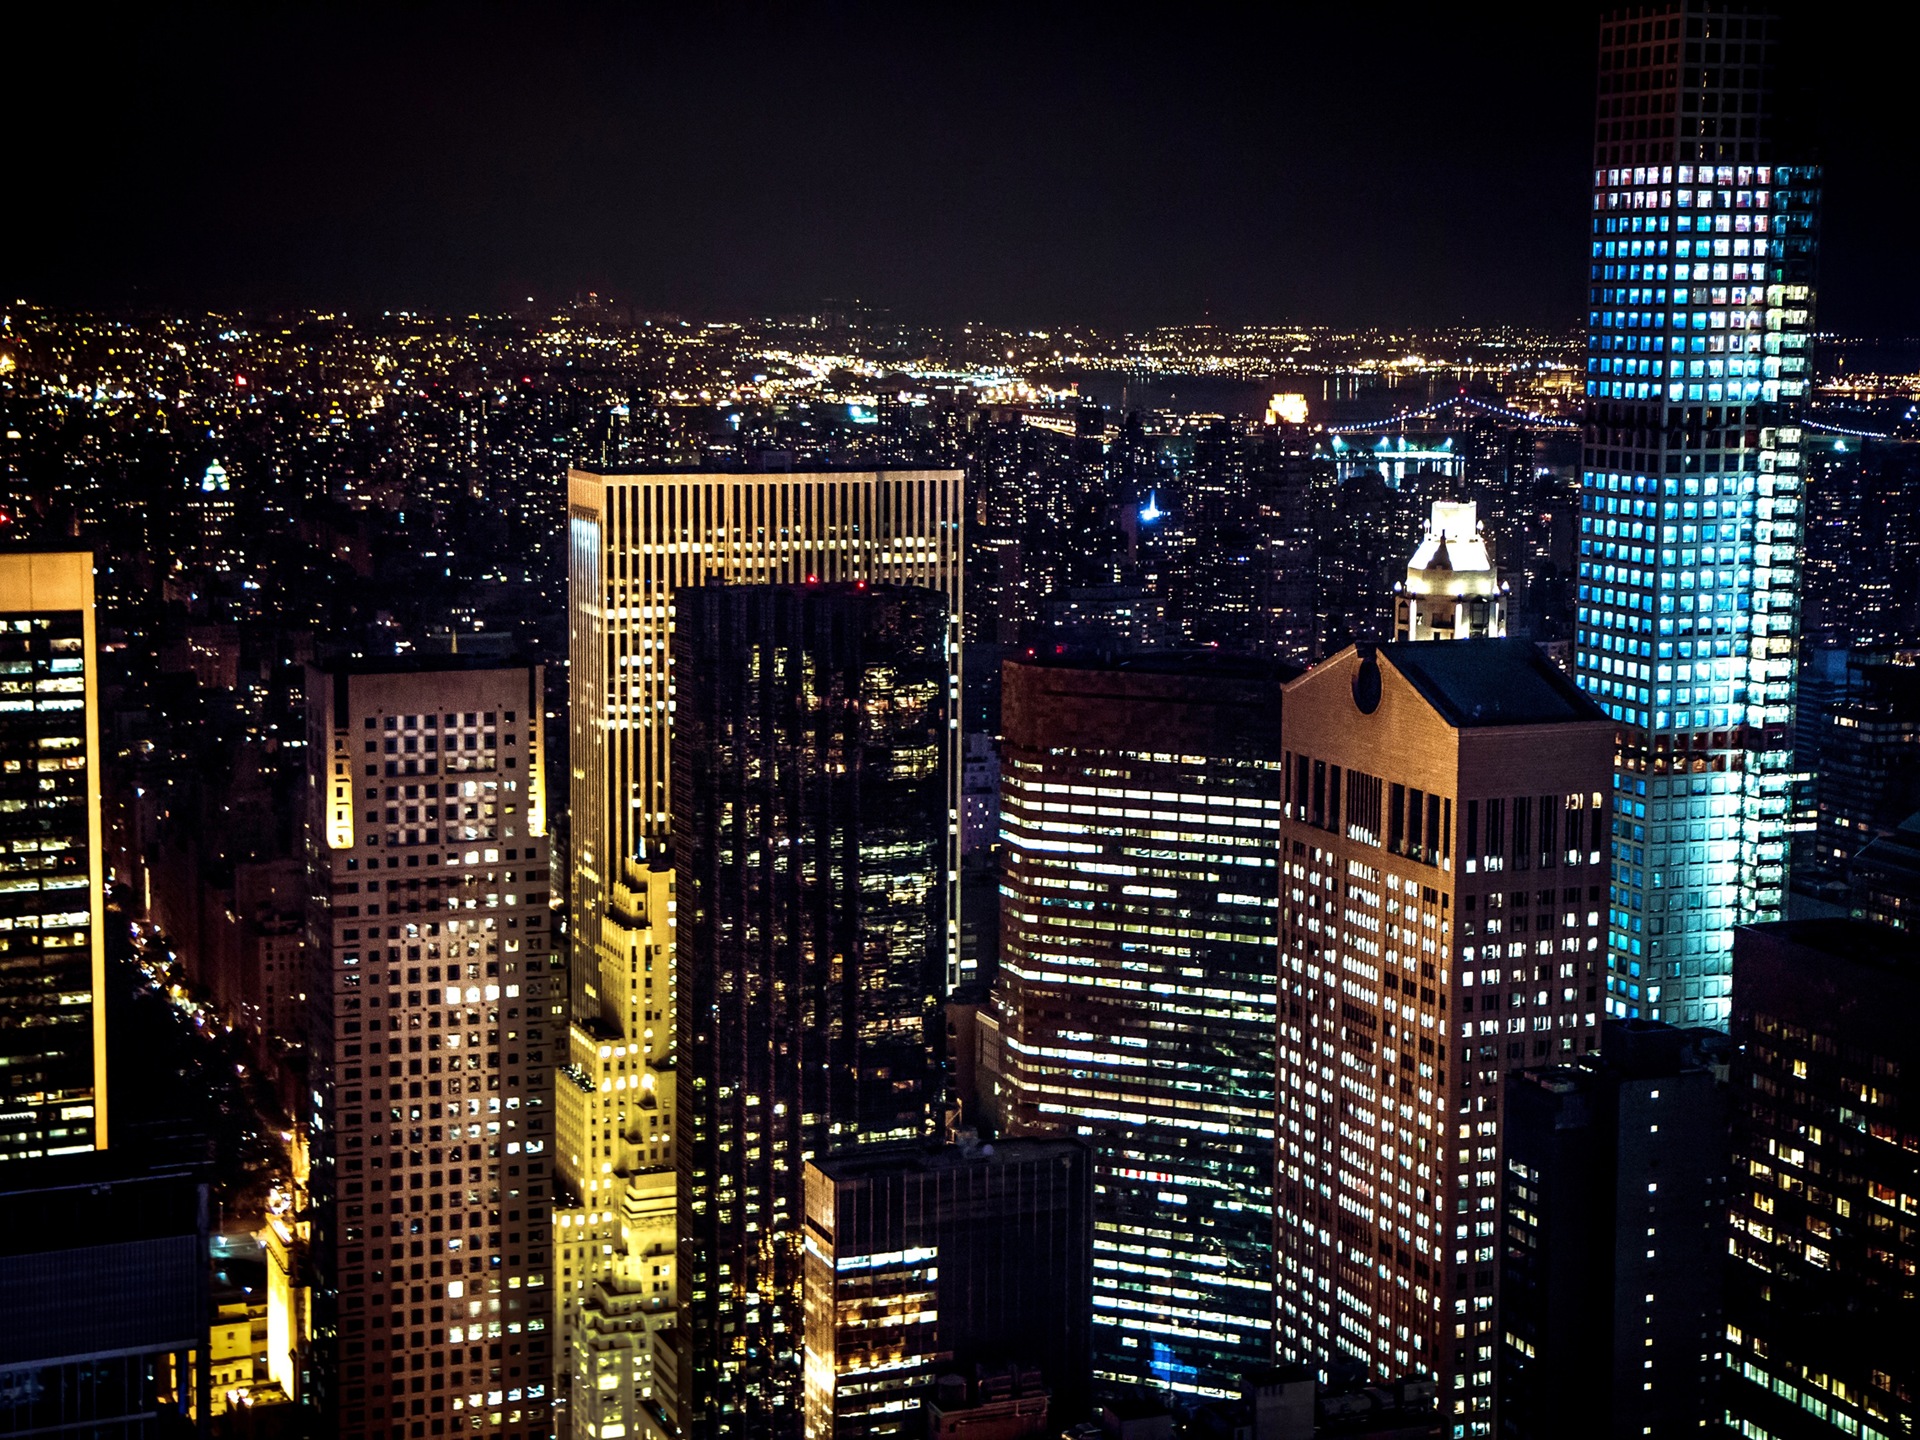 Empire State Building in New York, Stadt Nacht HD Wallpaper #9 - 1920x1440